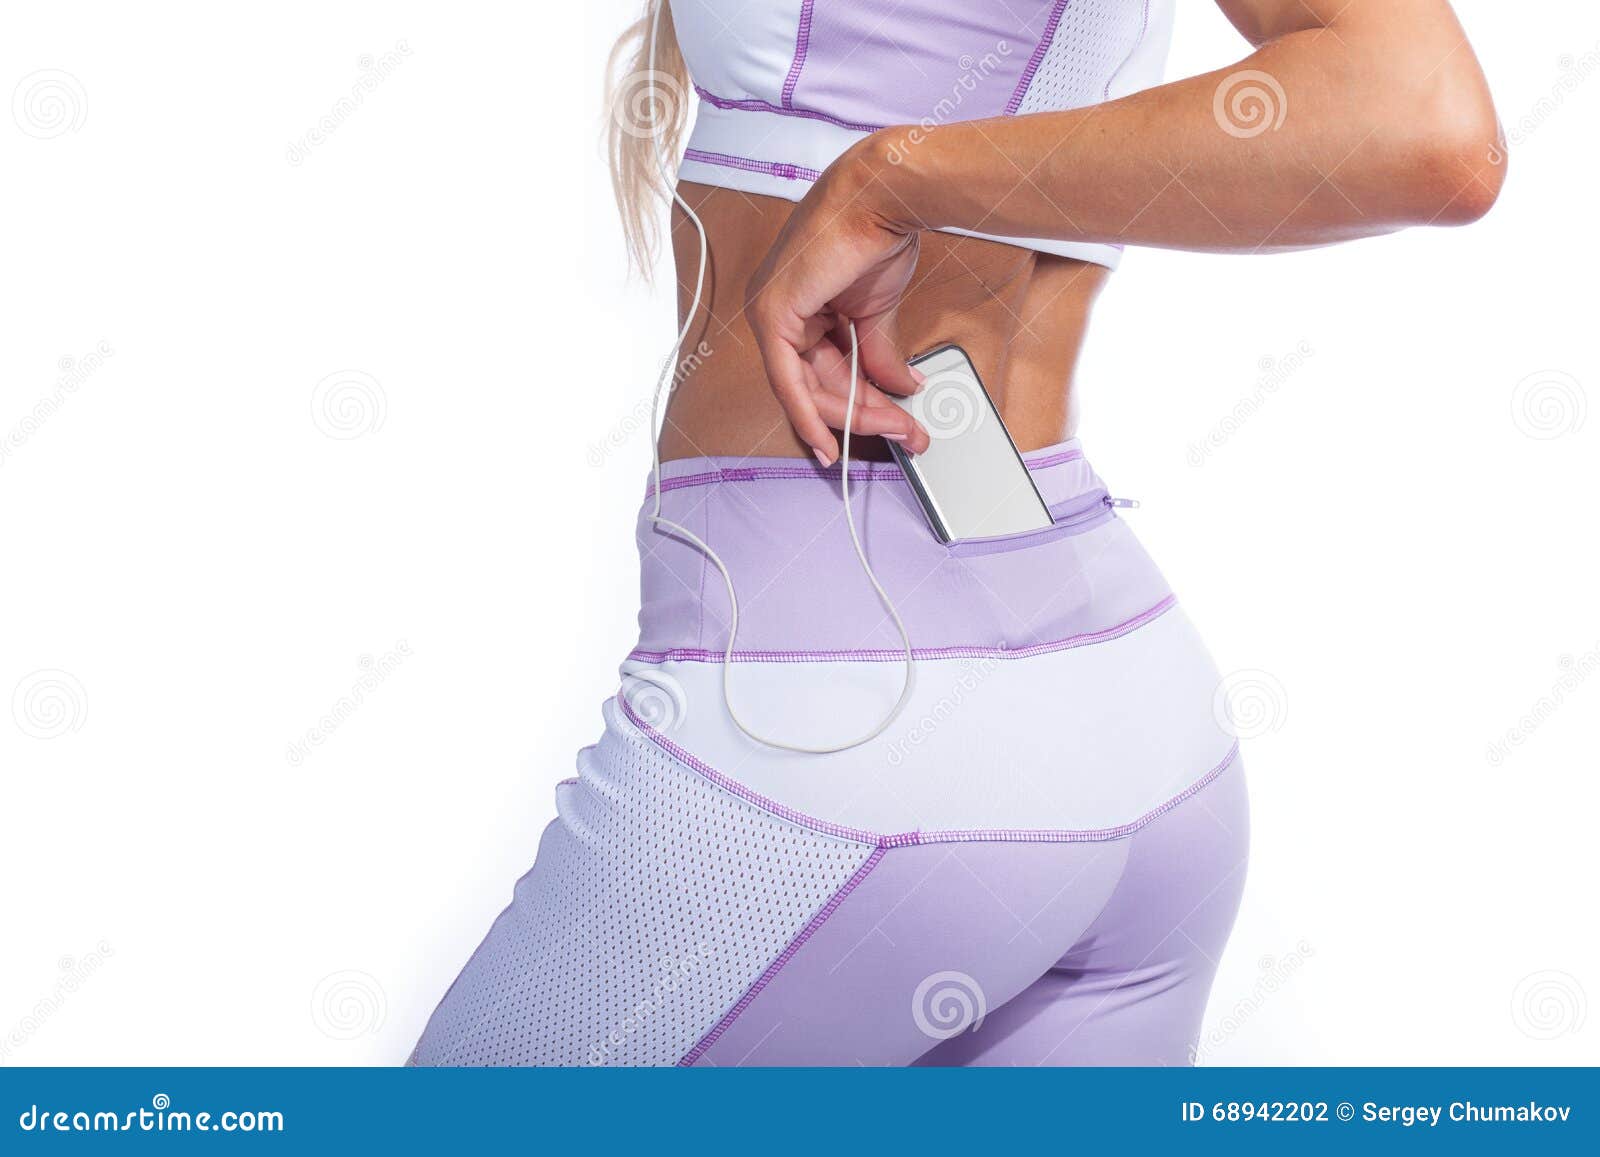 Woman In Yoga Pants With Music Player In Pocket Back View